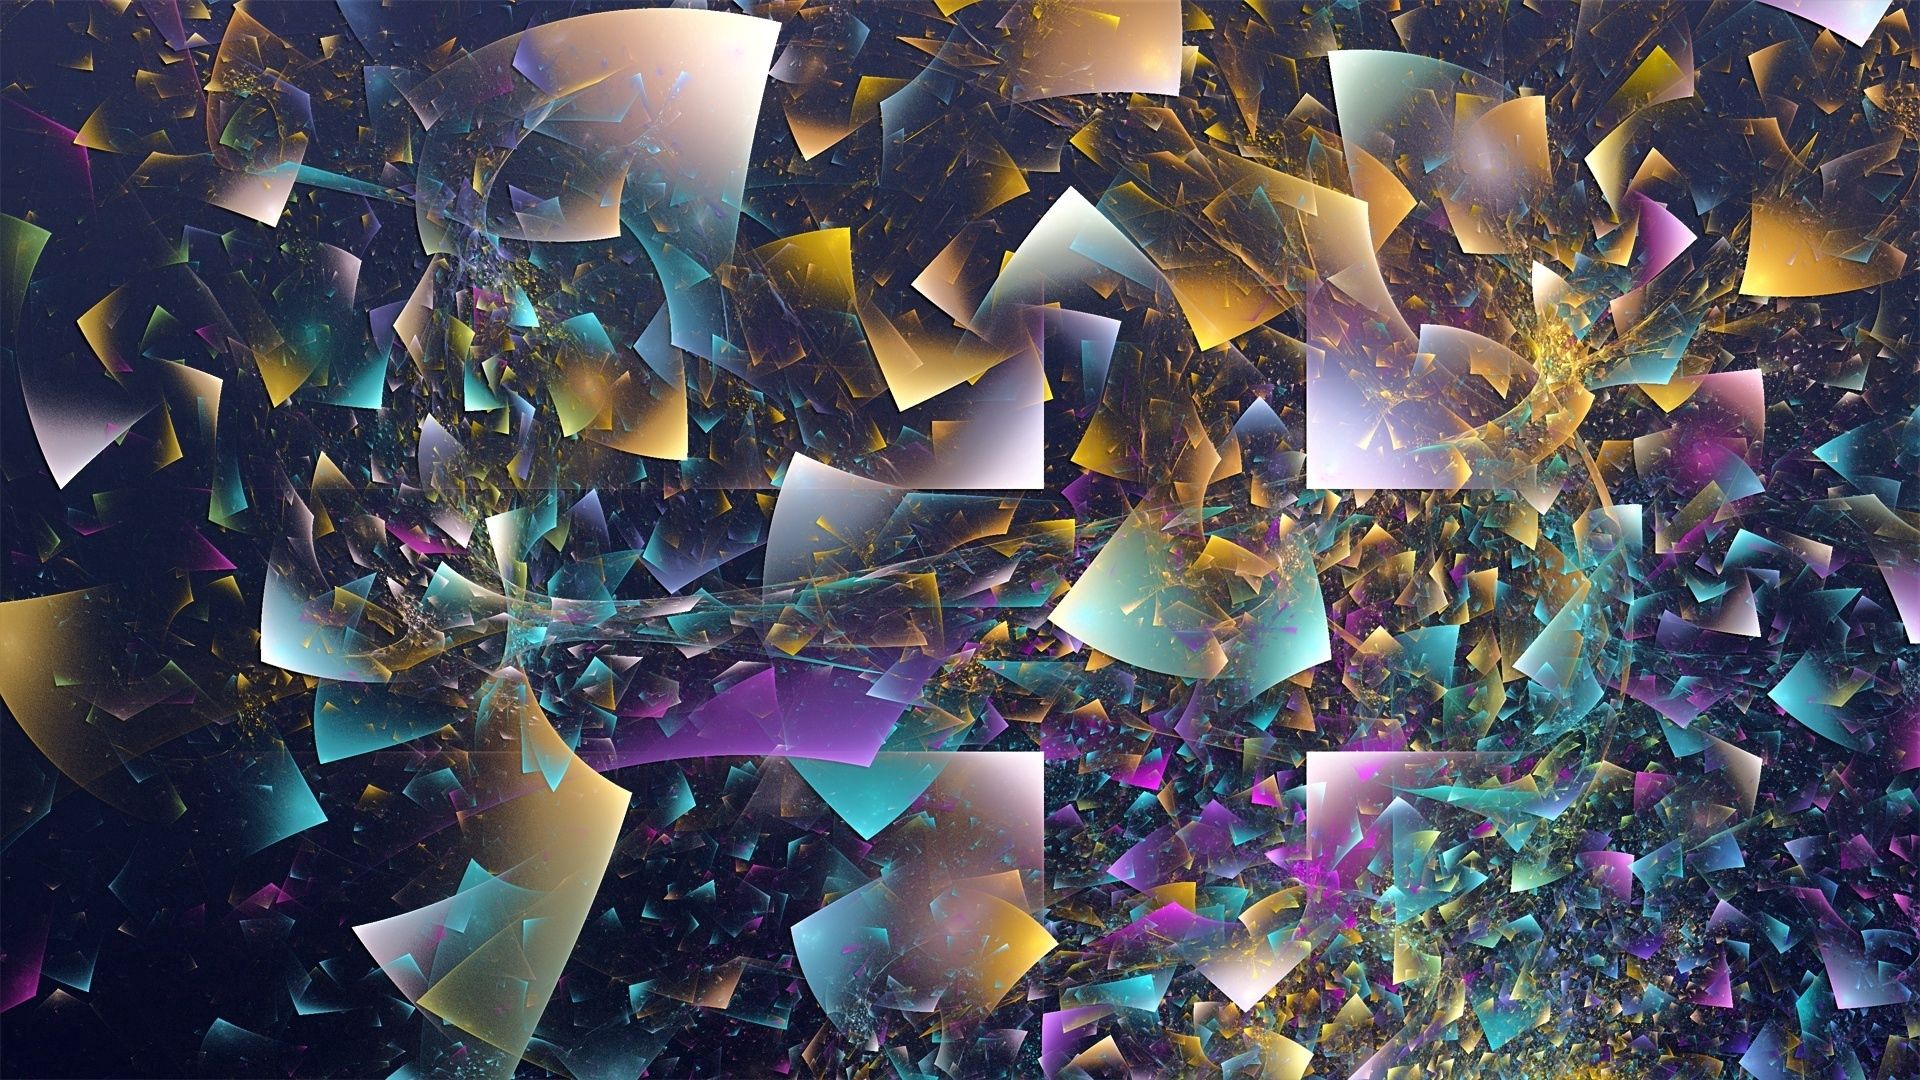 Lock Screen PC Wallpaper stains, abstract, background, multicolored, motley, spots, shards, smithereens